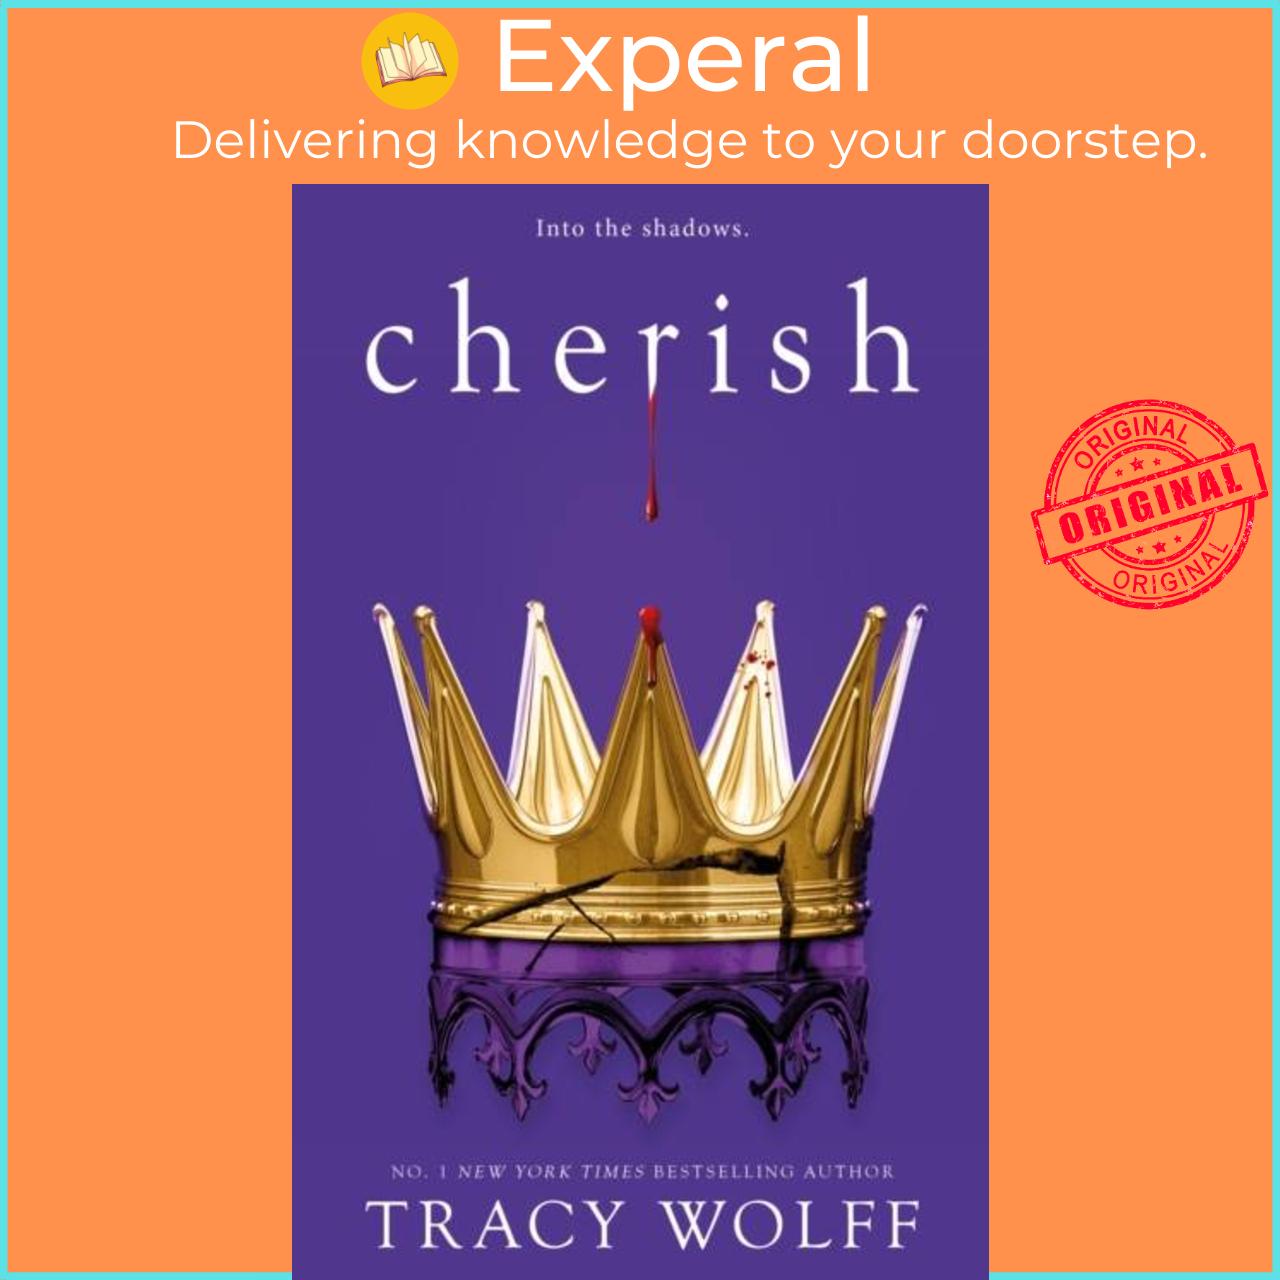 Sách - Cherish - Meet your new epic vampire romance addiction! by Tracy Wolff (UK edition, paperback)